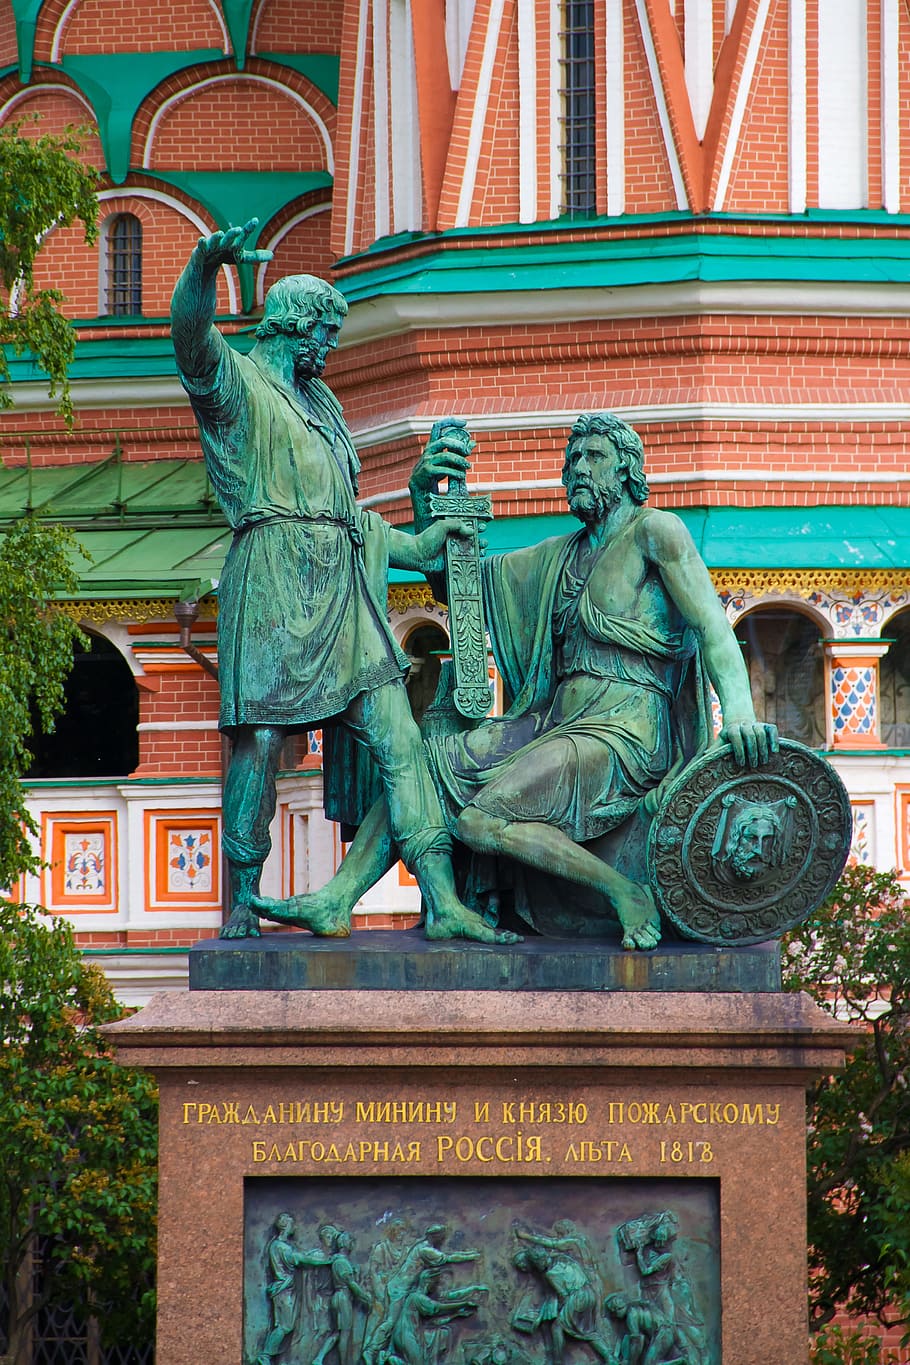 russia, moscow, red square, monument, minin, pozharsky, 1818, tourism, sculpture, art and craft